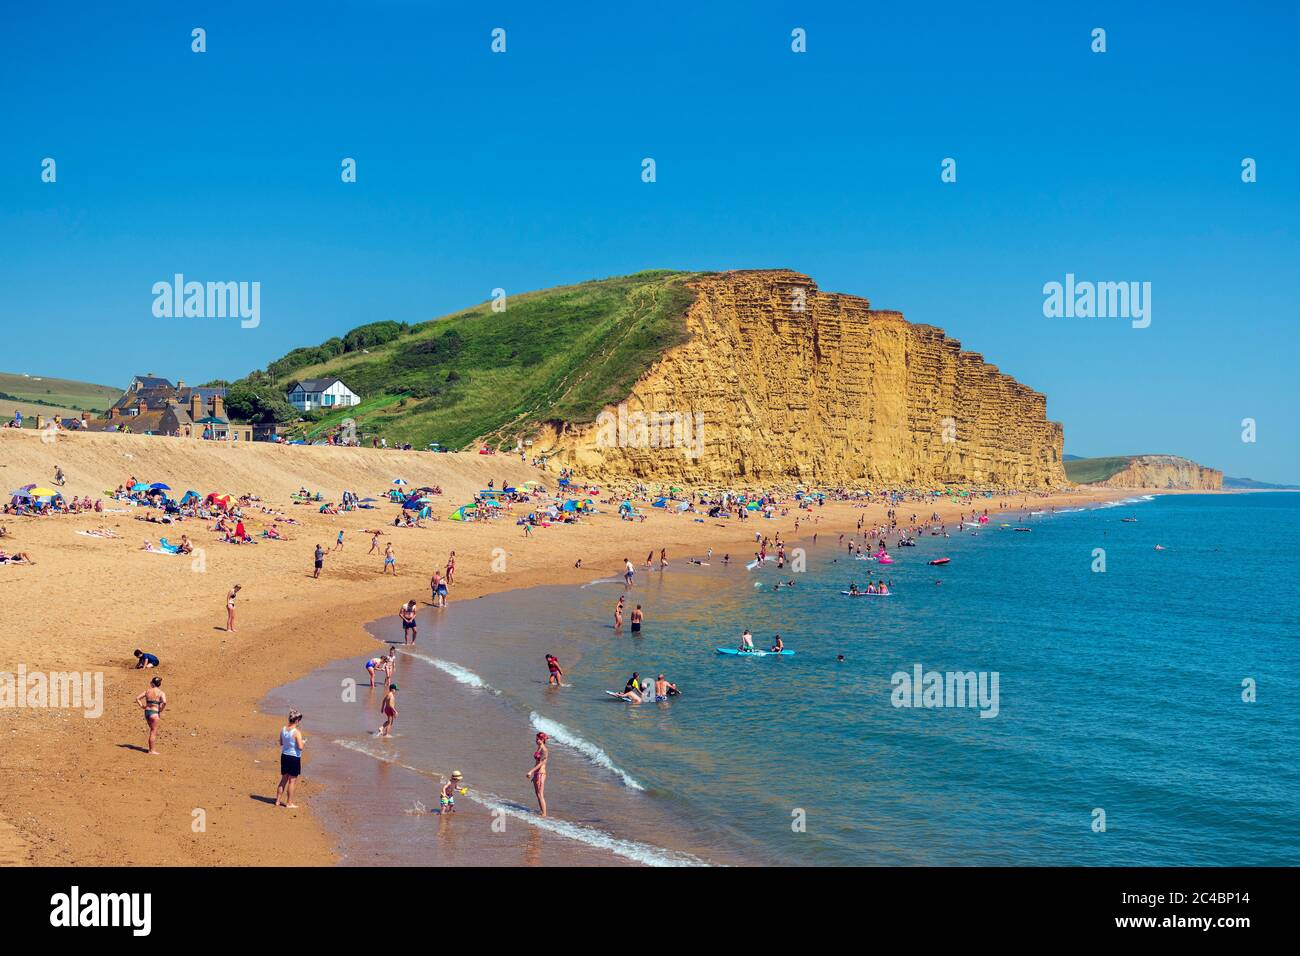 West Bay beach Dorset, UK. Seaside with people enjoying the summer weather at the beach and paddling in the sea. Stock Photo